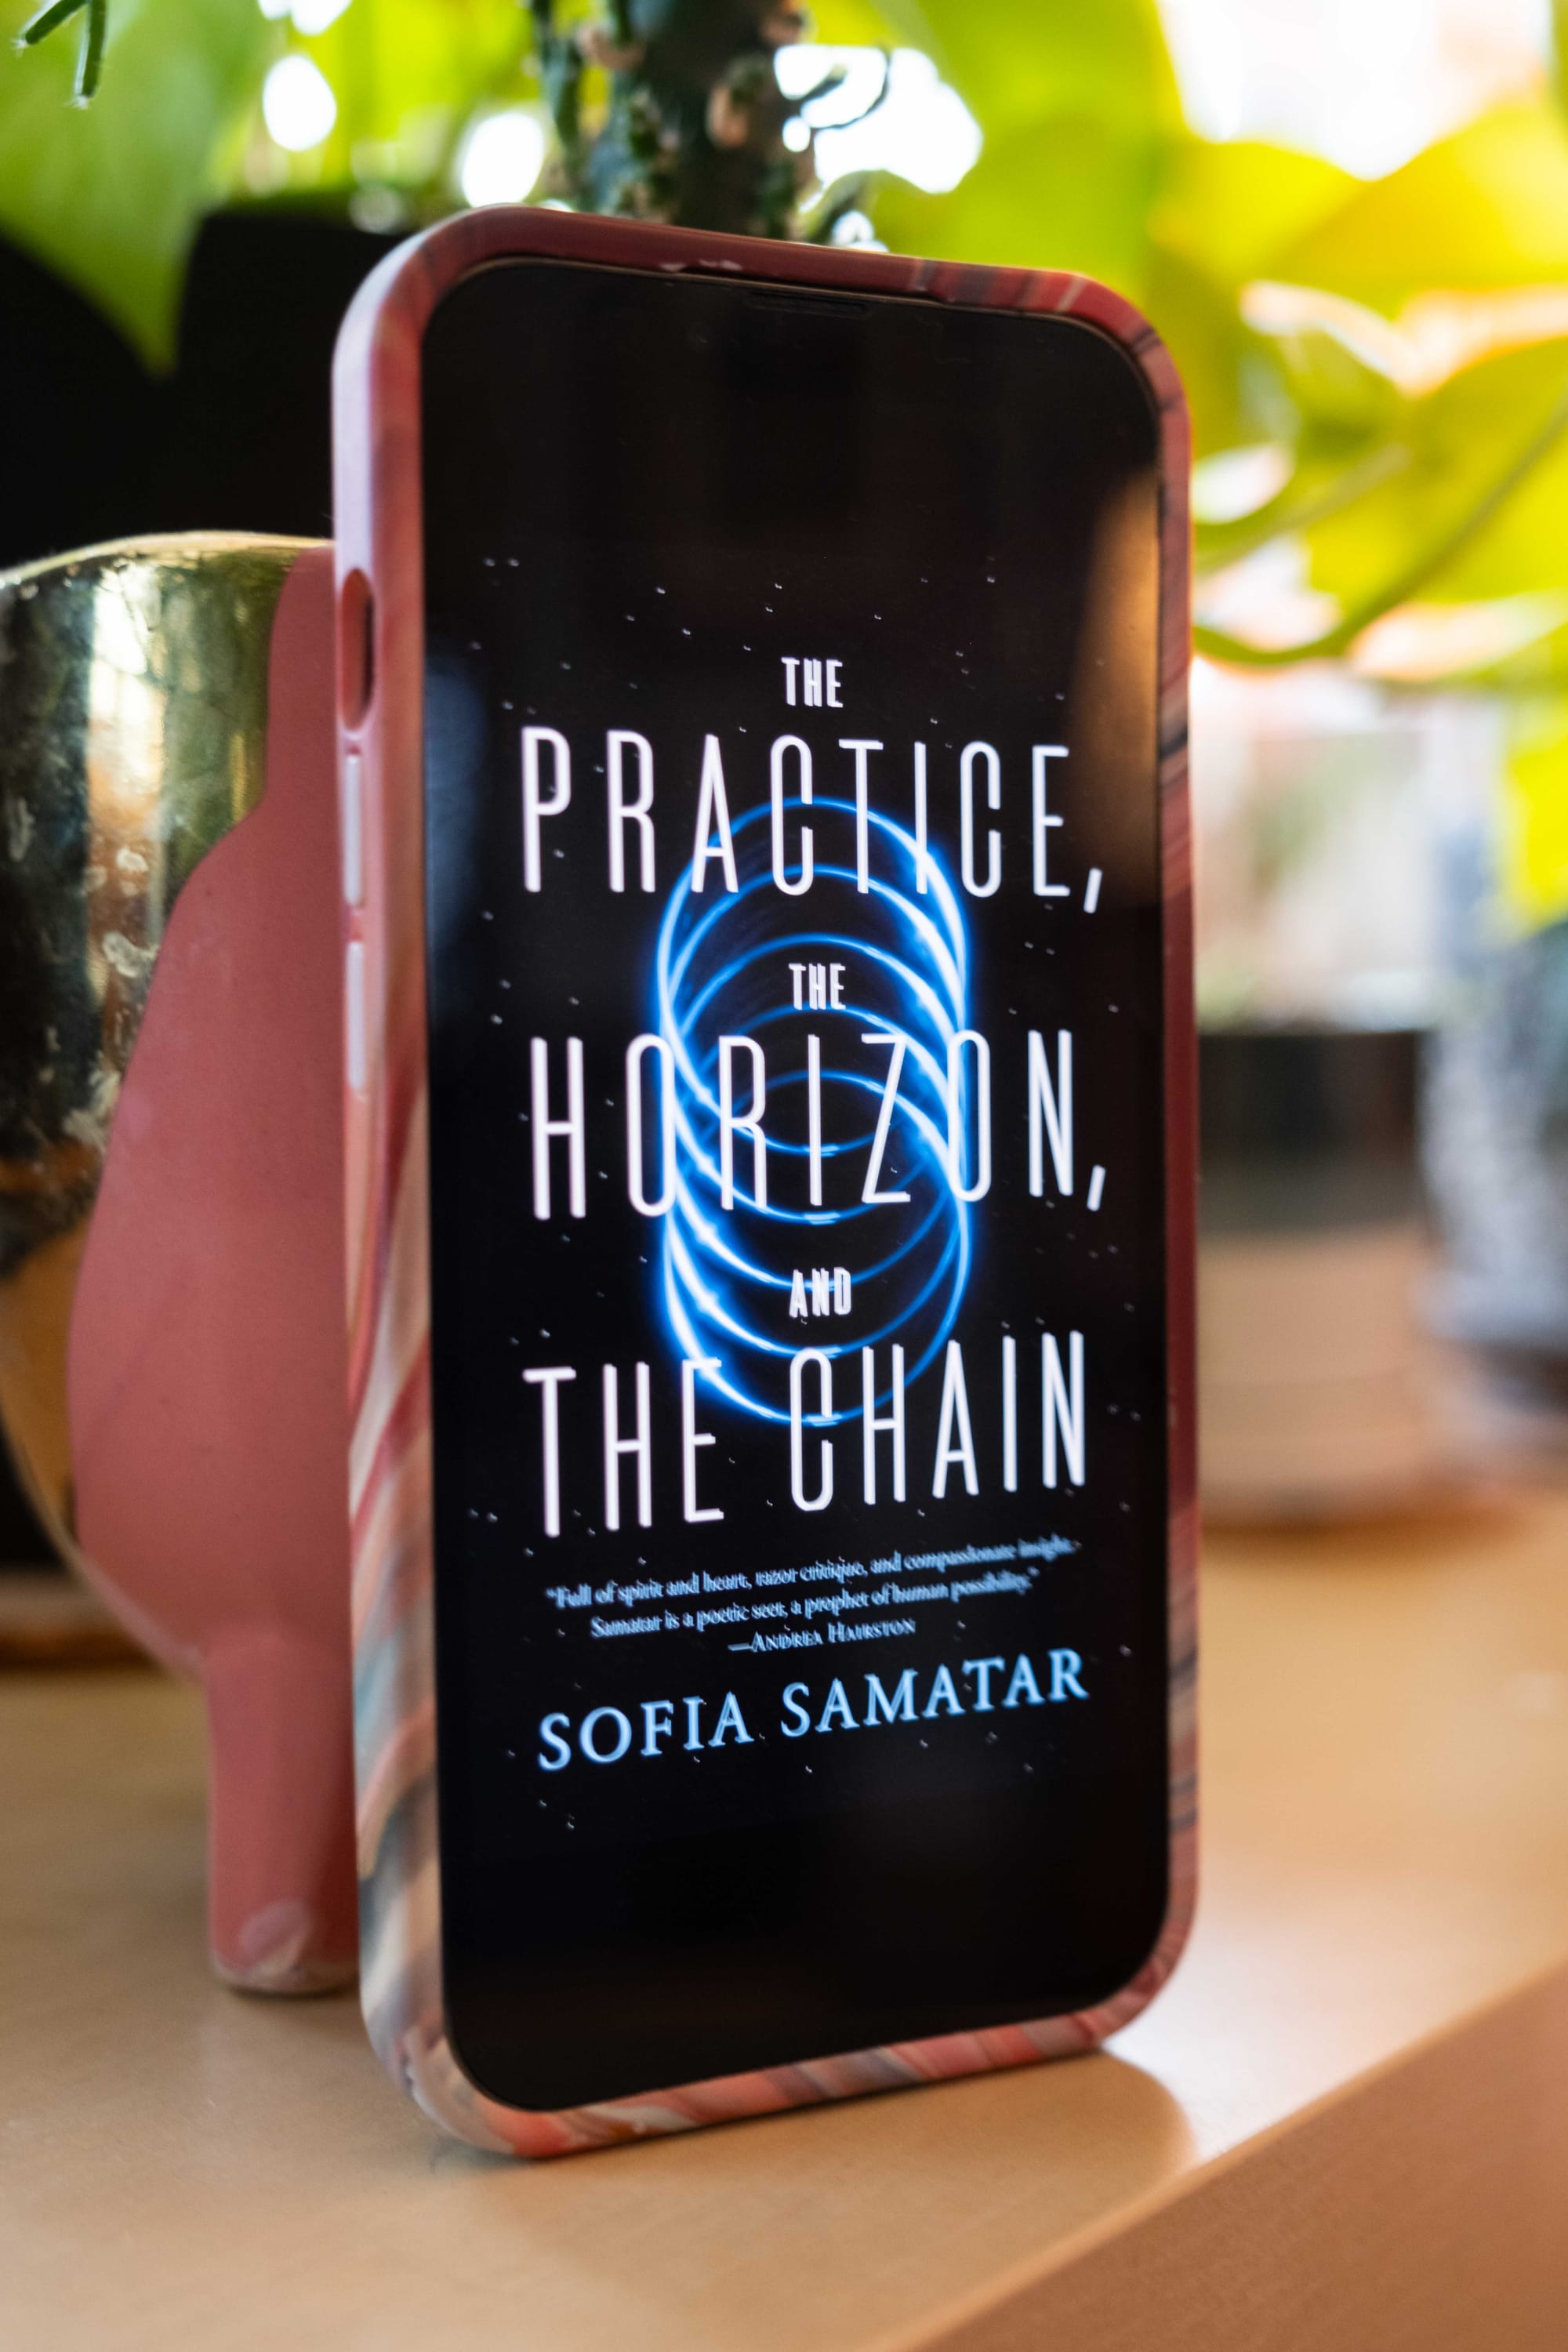 Book cover for The Practice, the Horizon, and the Chain by Sofia Samatar on an iPhone